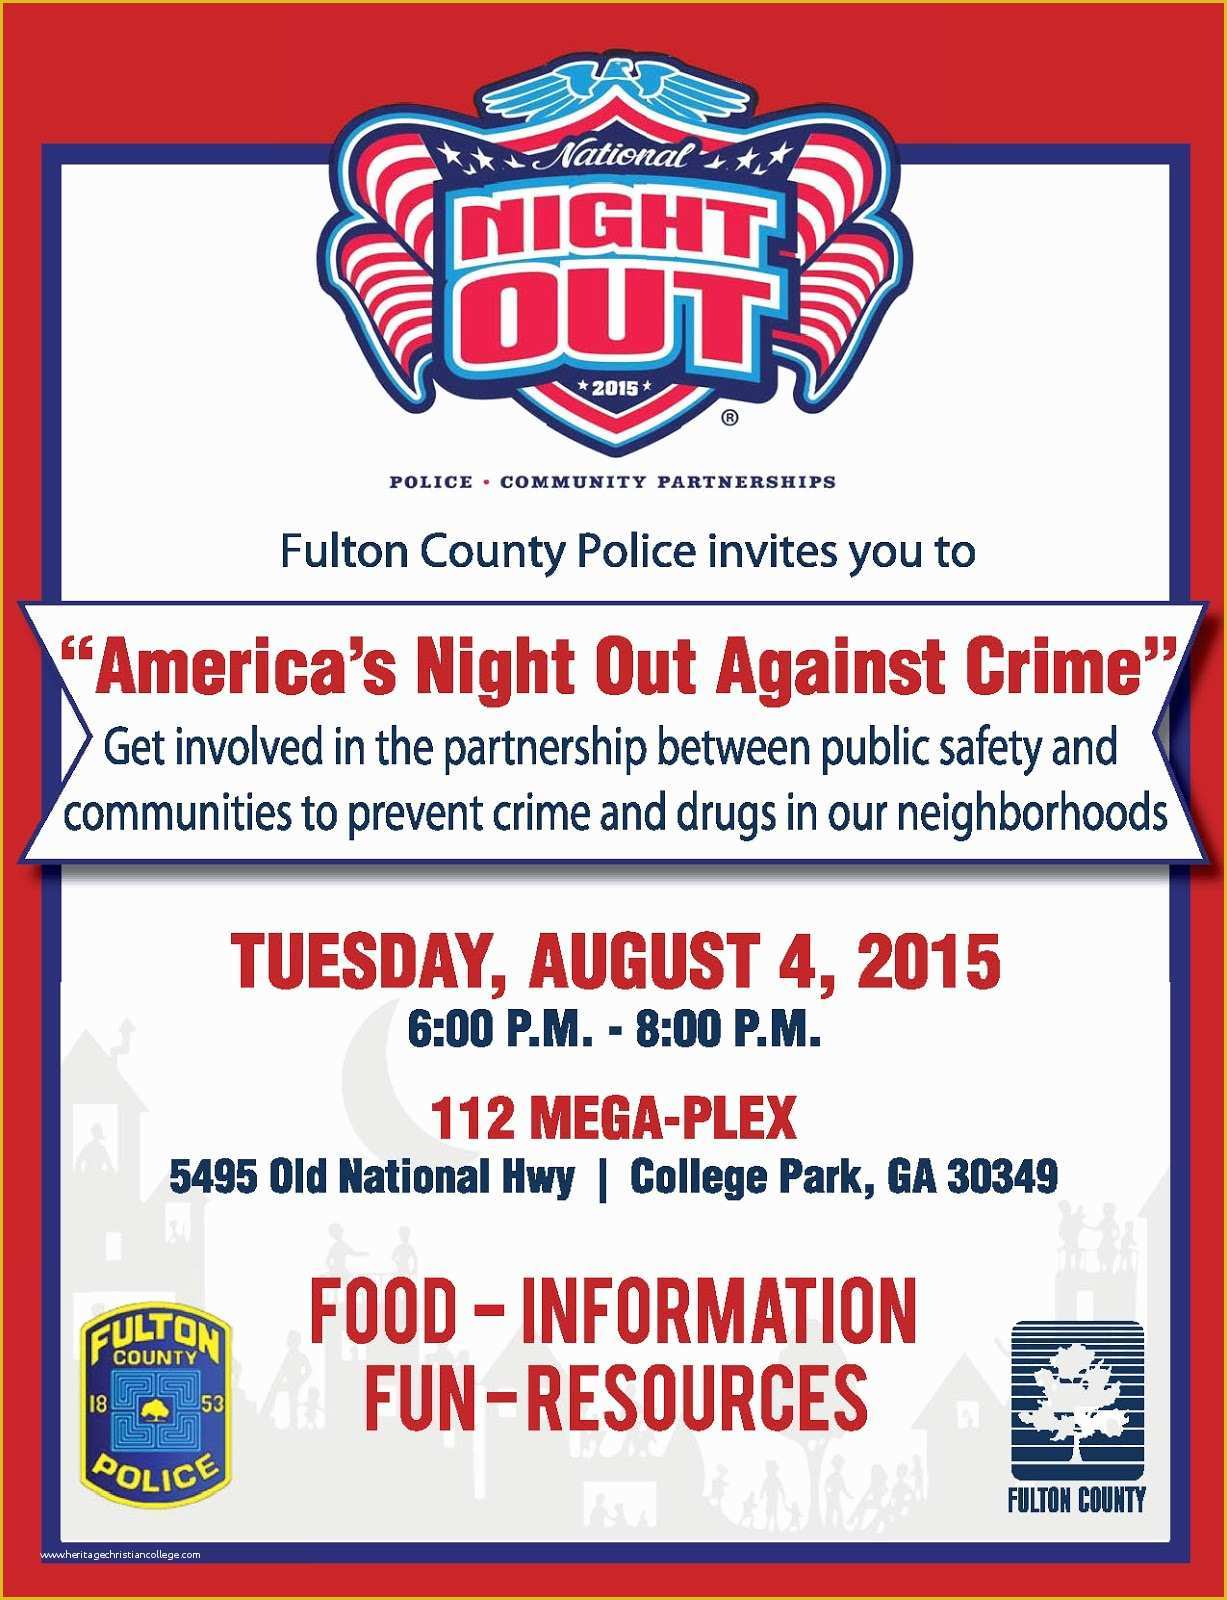 National Night Out Flyer Template Free Of Fulton County Government Fulton County Police Invites You